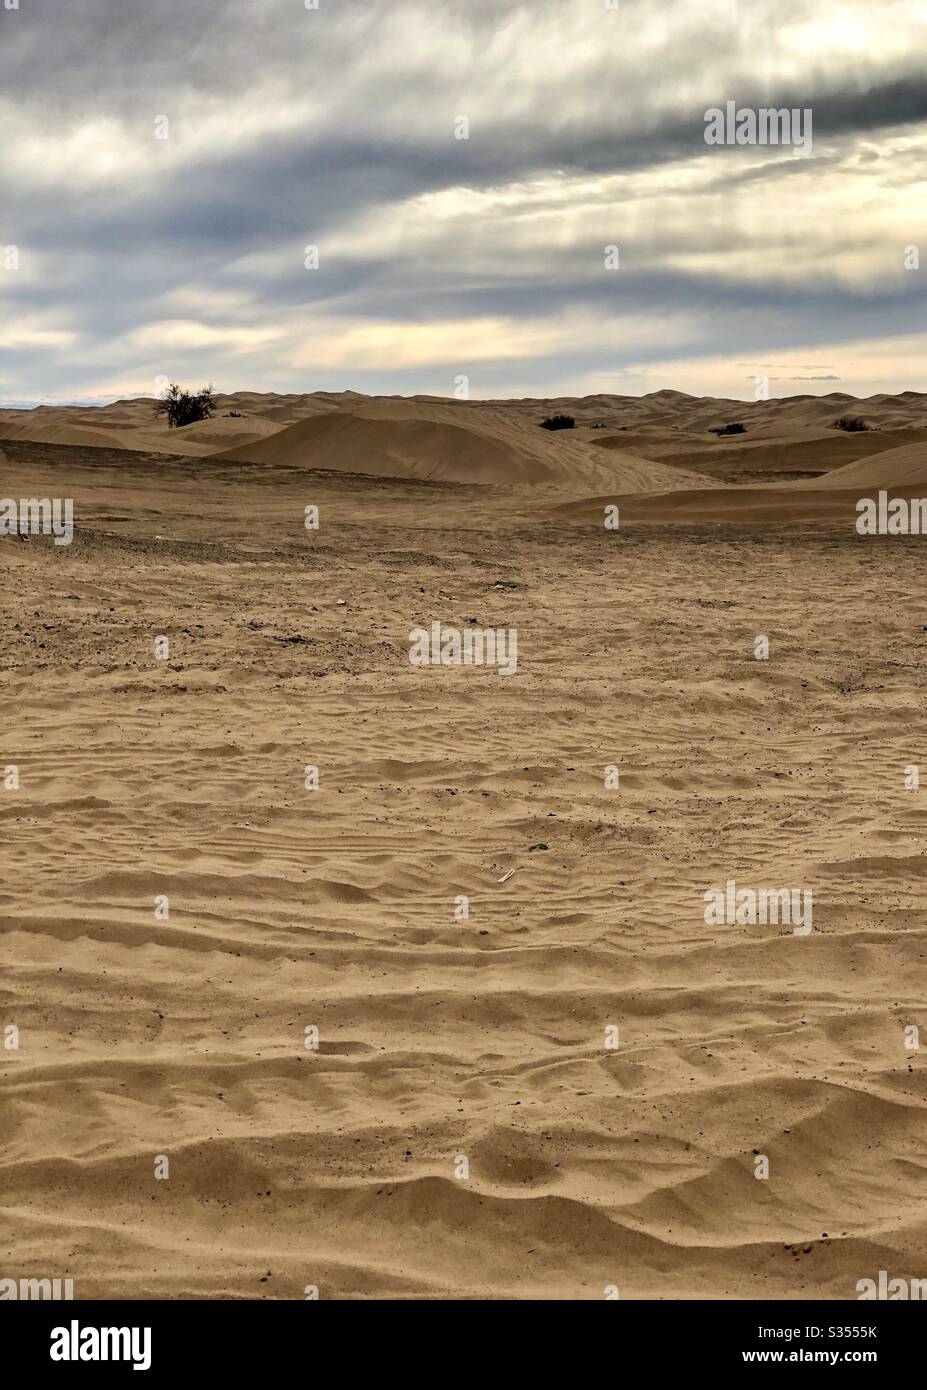 Sand dunes, four off road vehicles, barely seen, fun times, activity, groups, togetherness, outdoors, tracks in sand, textures, neutral colors, cloudy sky, late afternoon, nature, natural, copy space Stock Photo